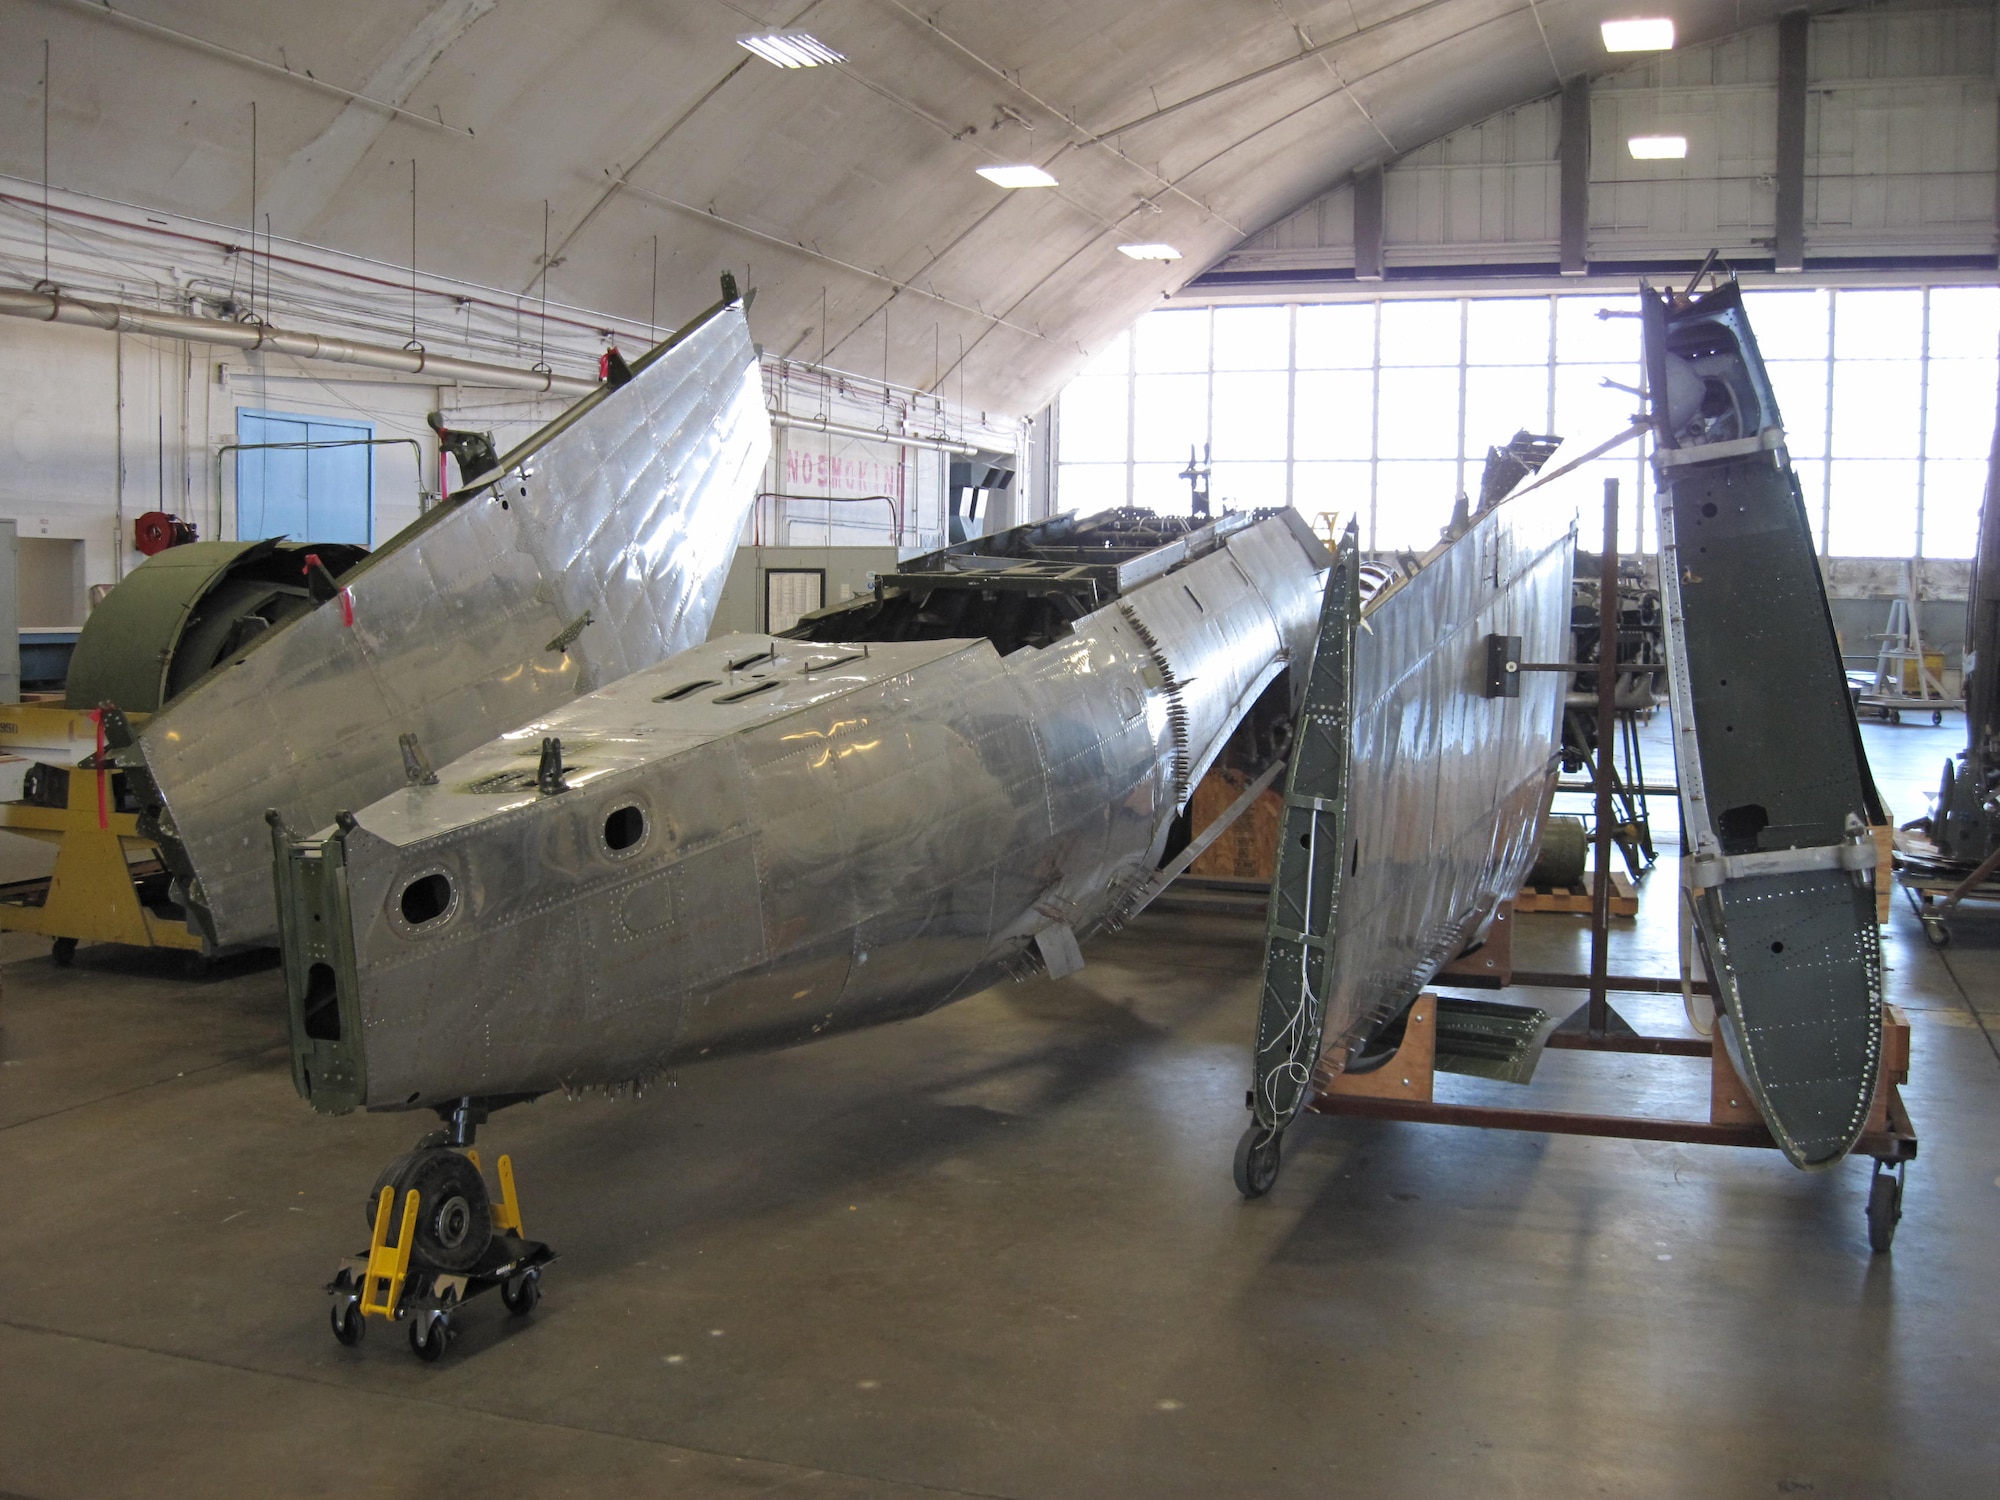 DAYTON, Ohio -- The Curtiss A-25A in storage at the National Museum of the United States Air Force. (U.S. Air Force photo)